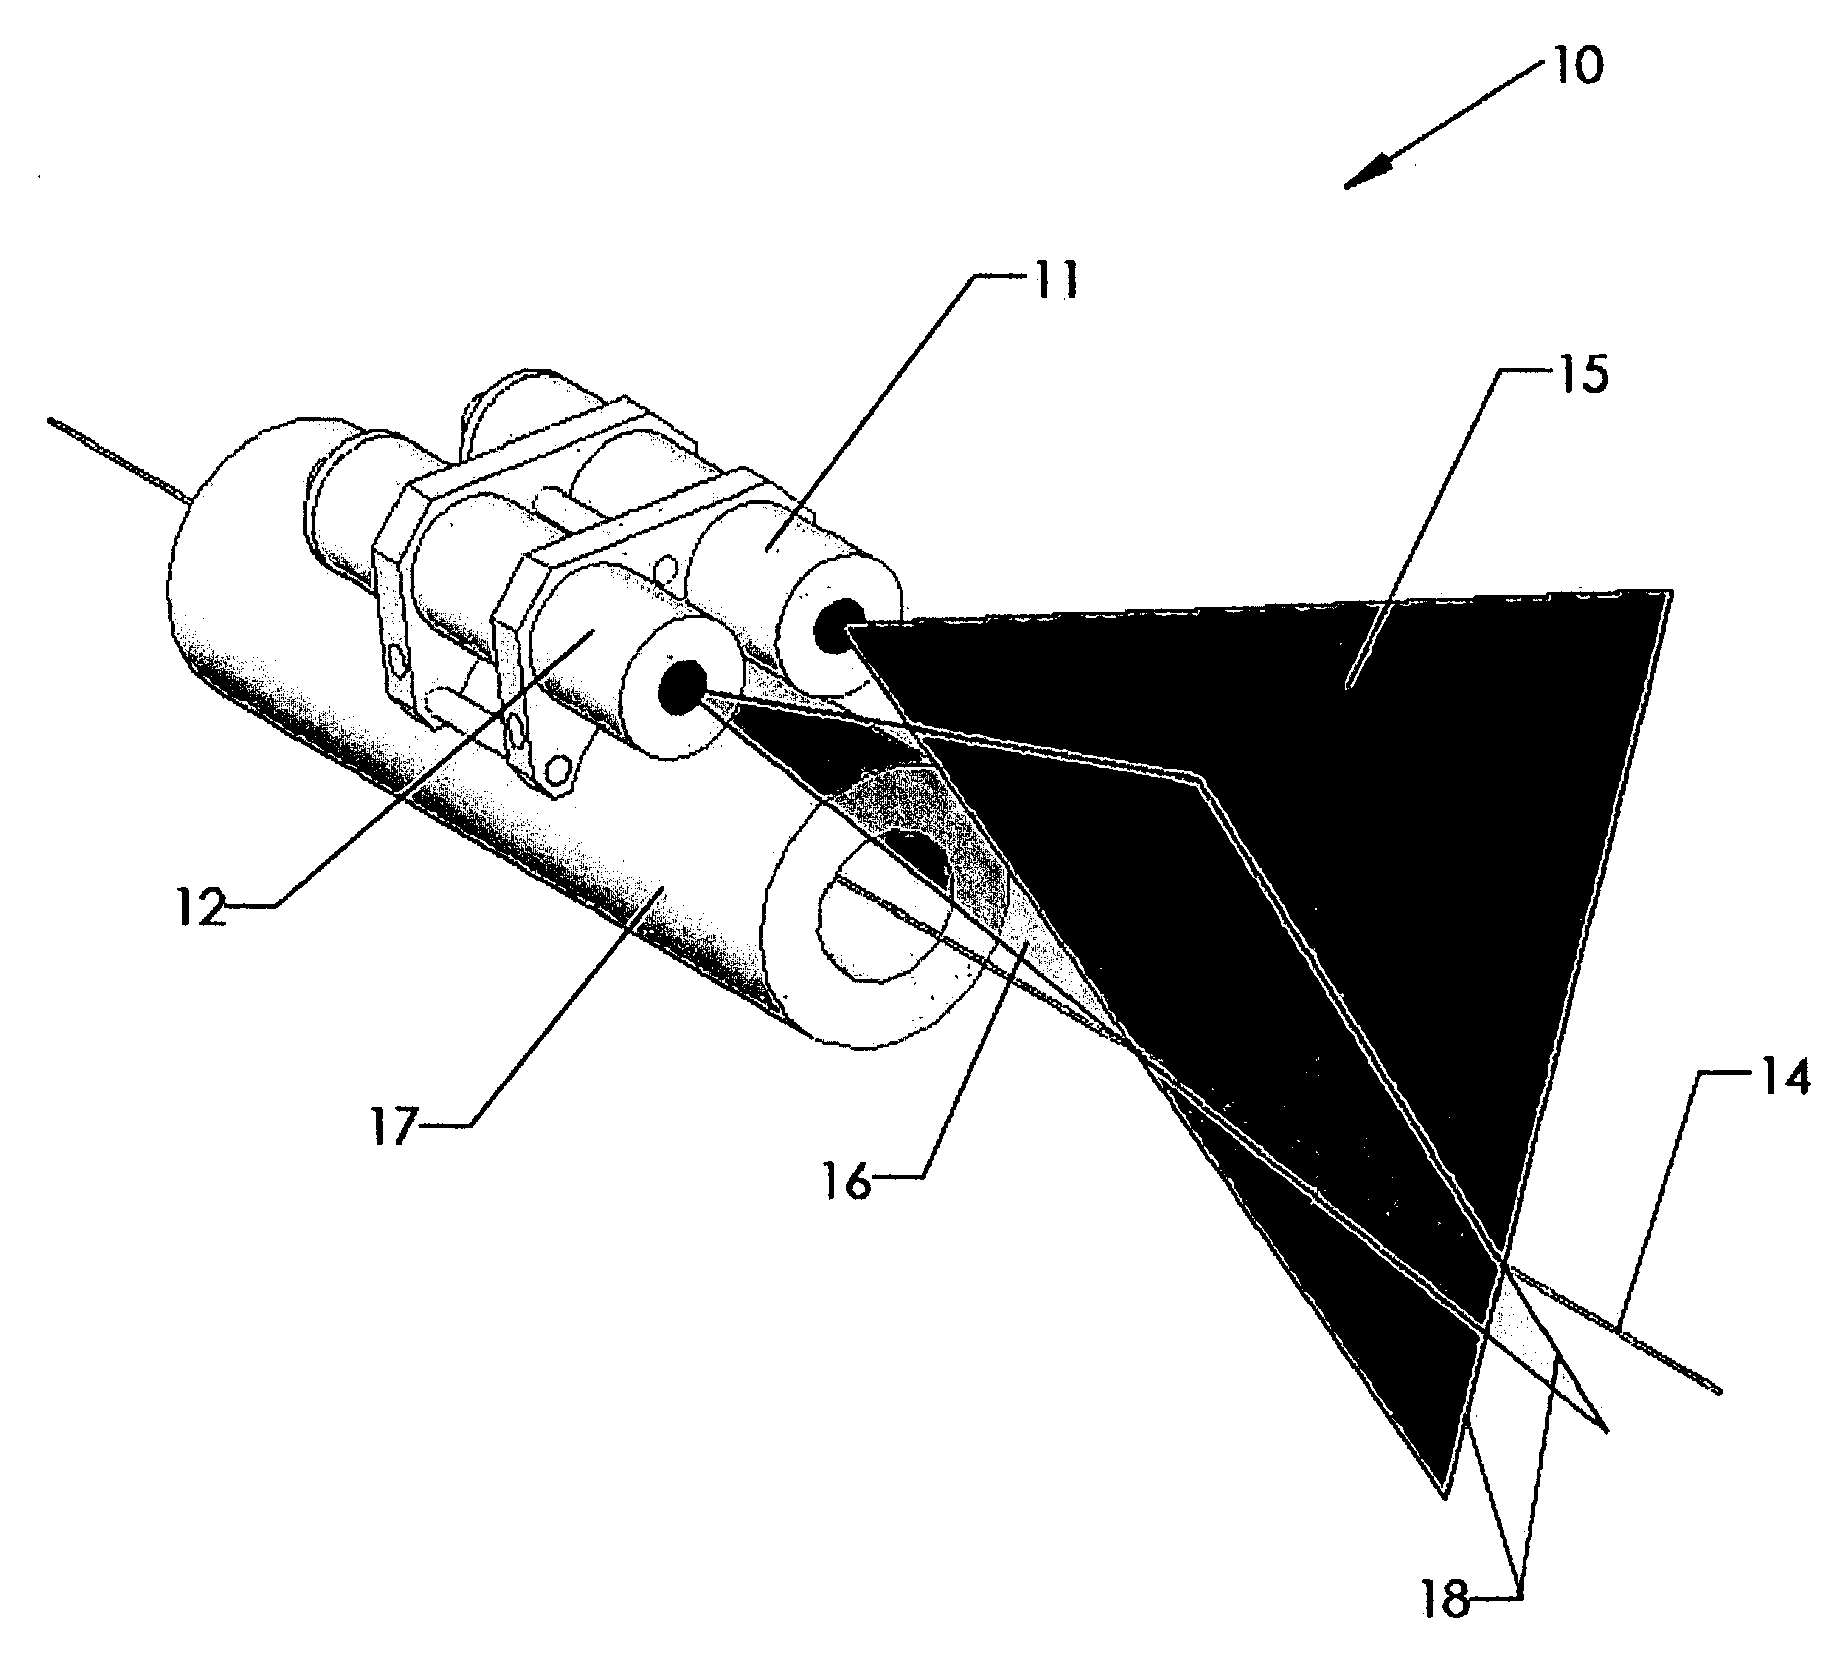 Method of projecting zero-convergence aiming beam on a target and zero-convergence laser aiming system